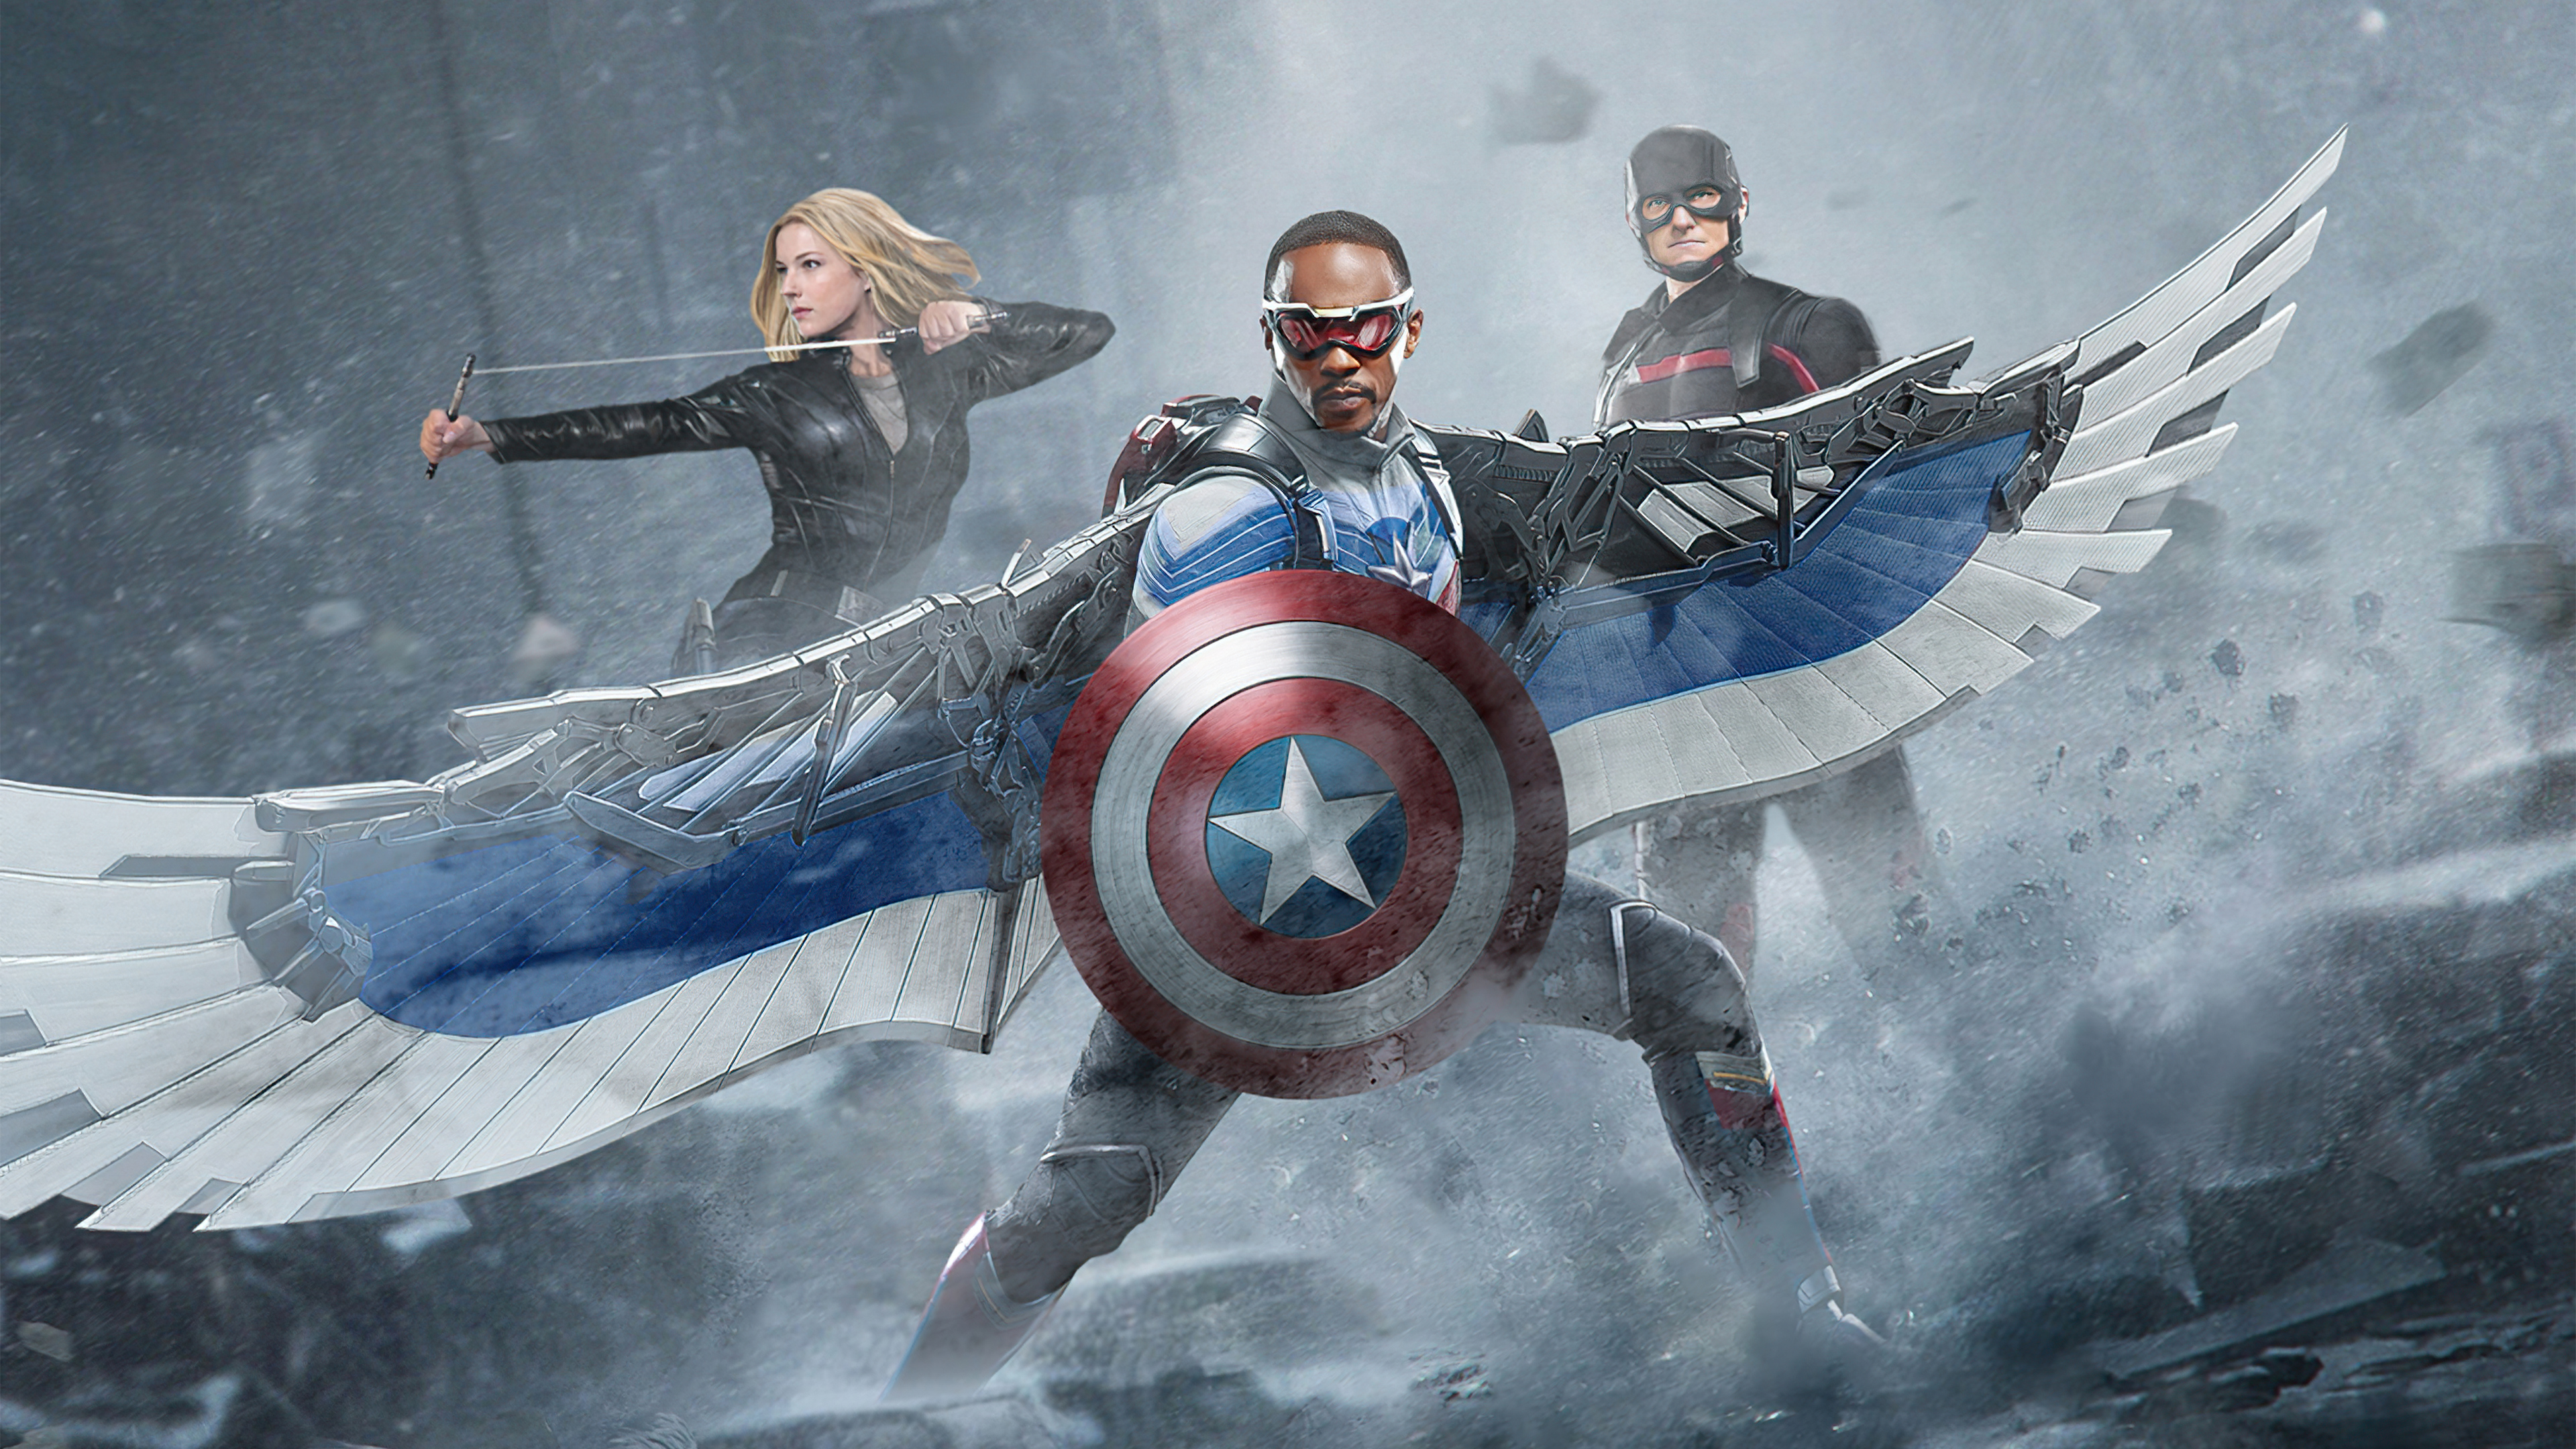 The Return of Captain America by BluSky Design